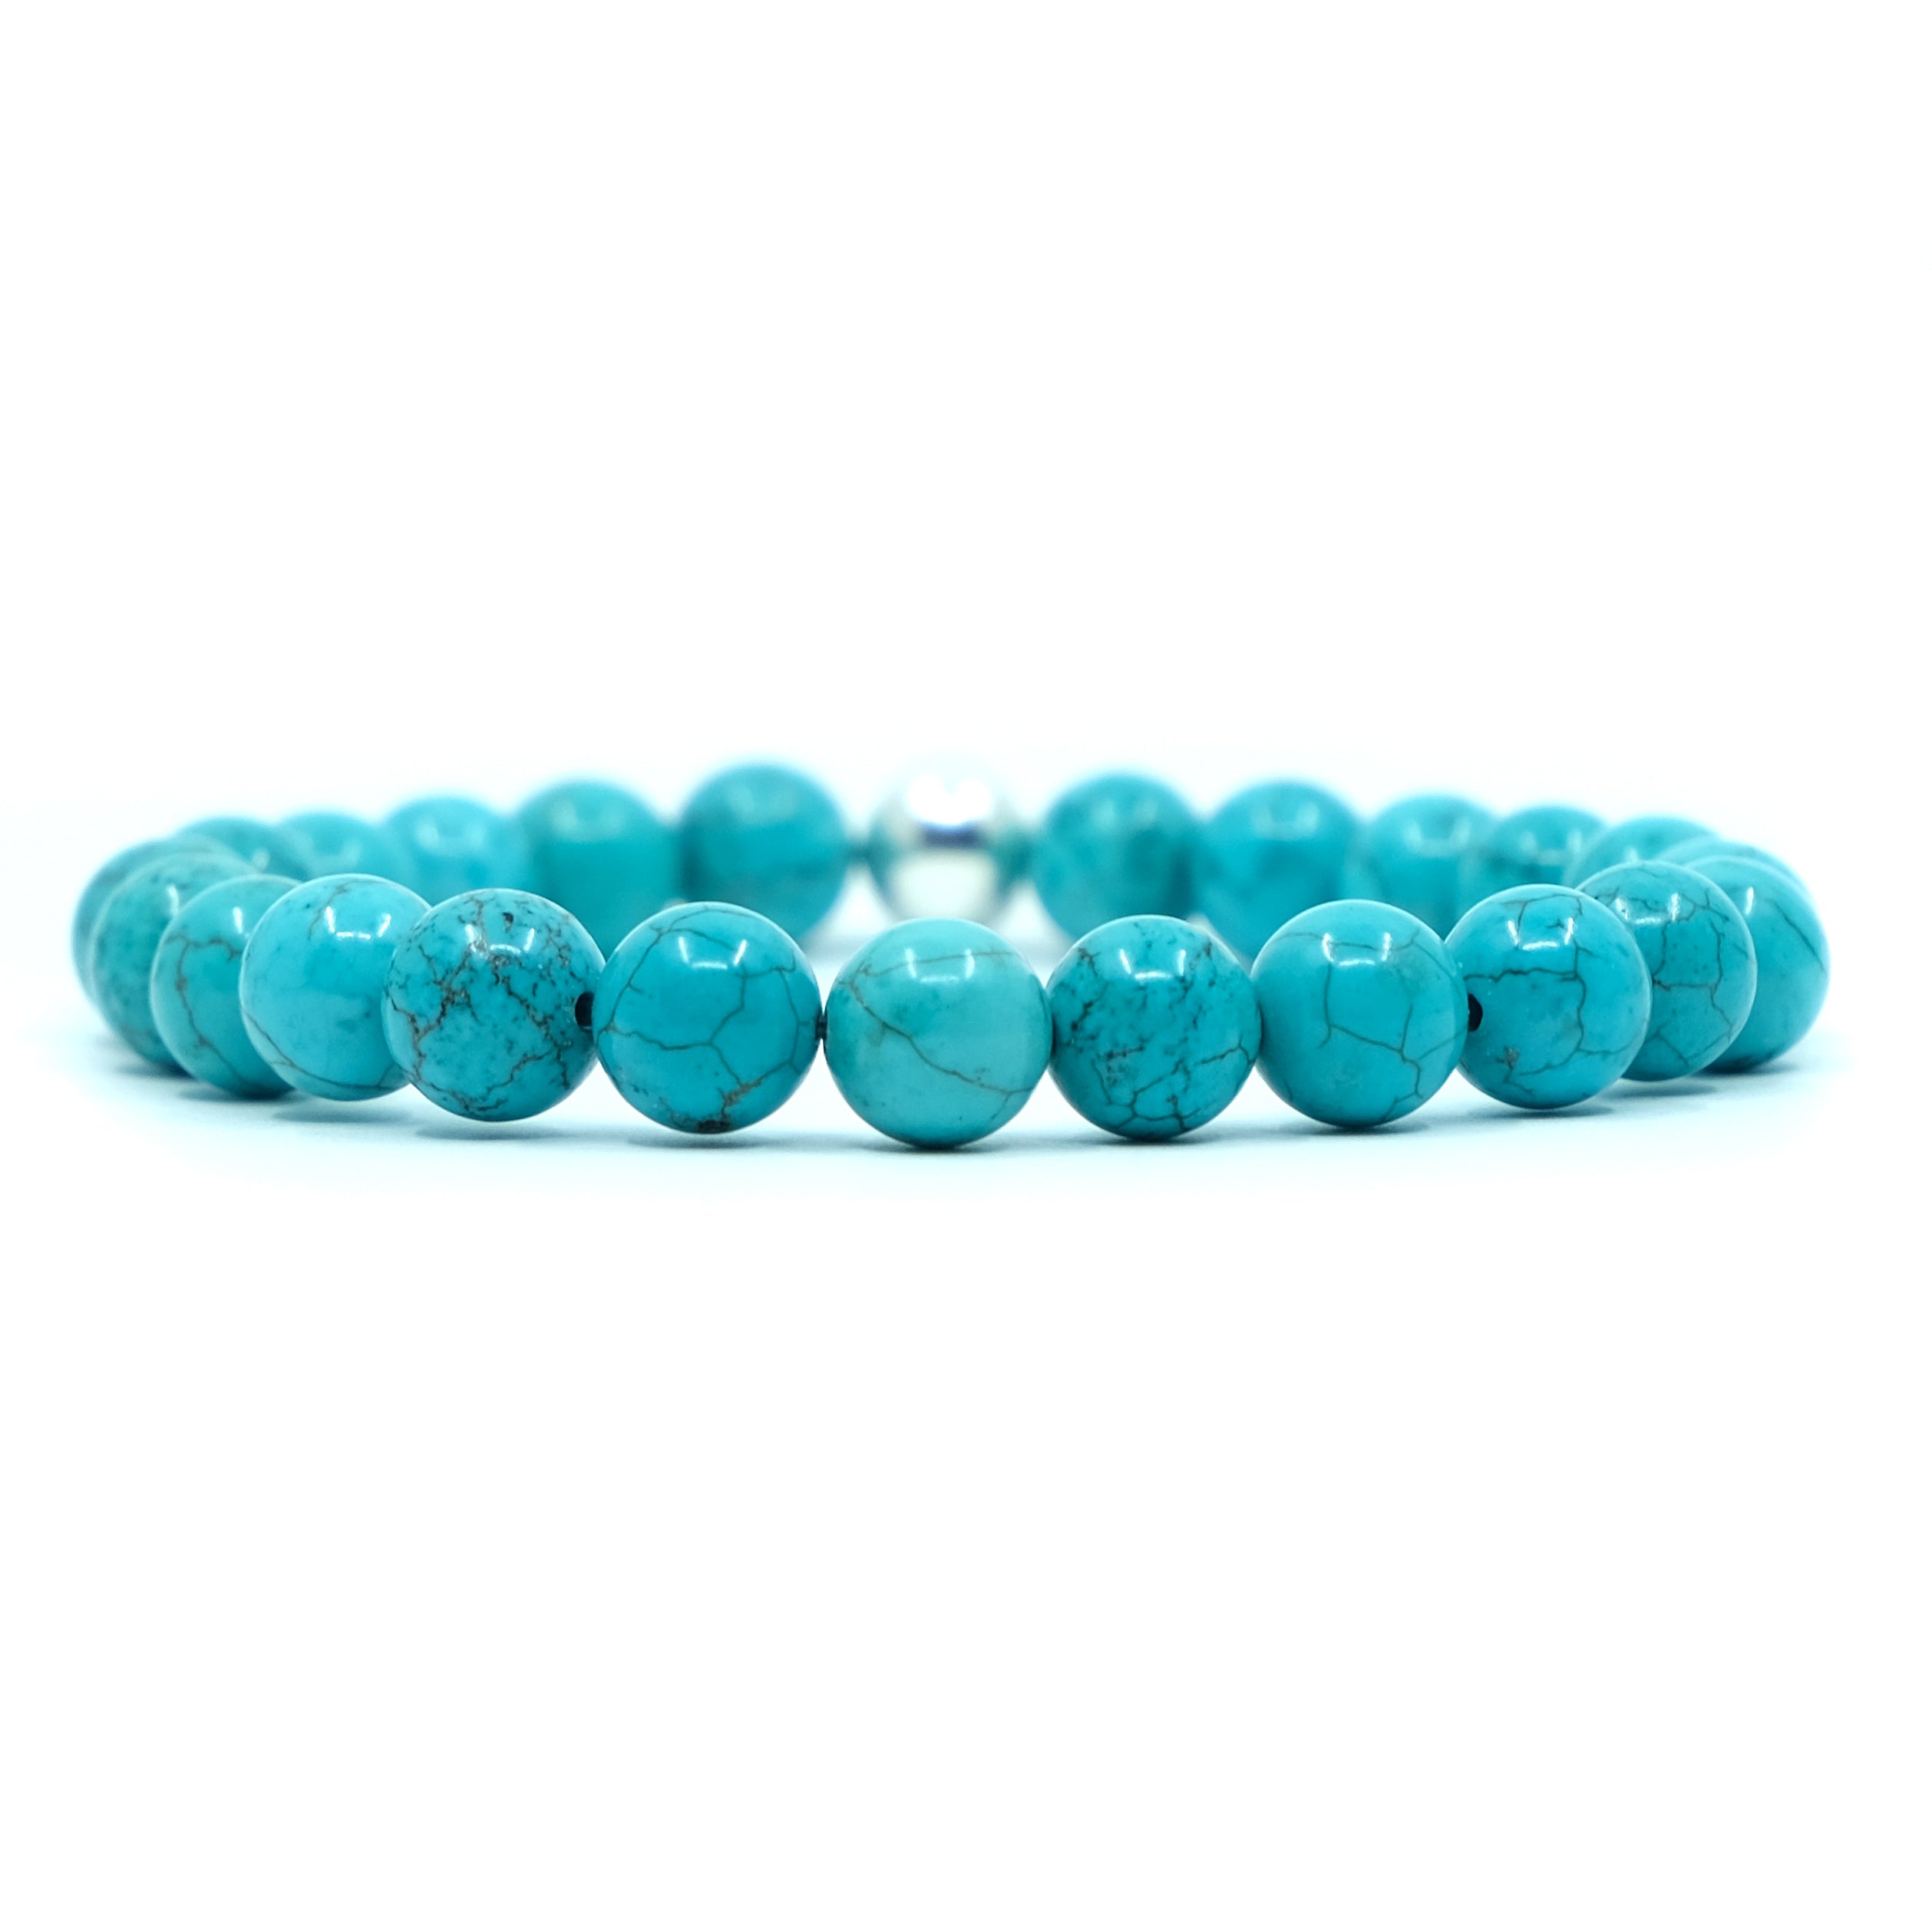 Turquoise gemstone stretch bracelet with 925 silver feature bead